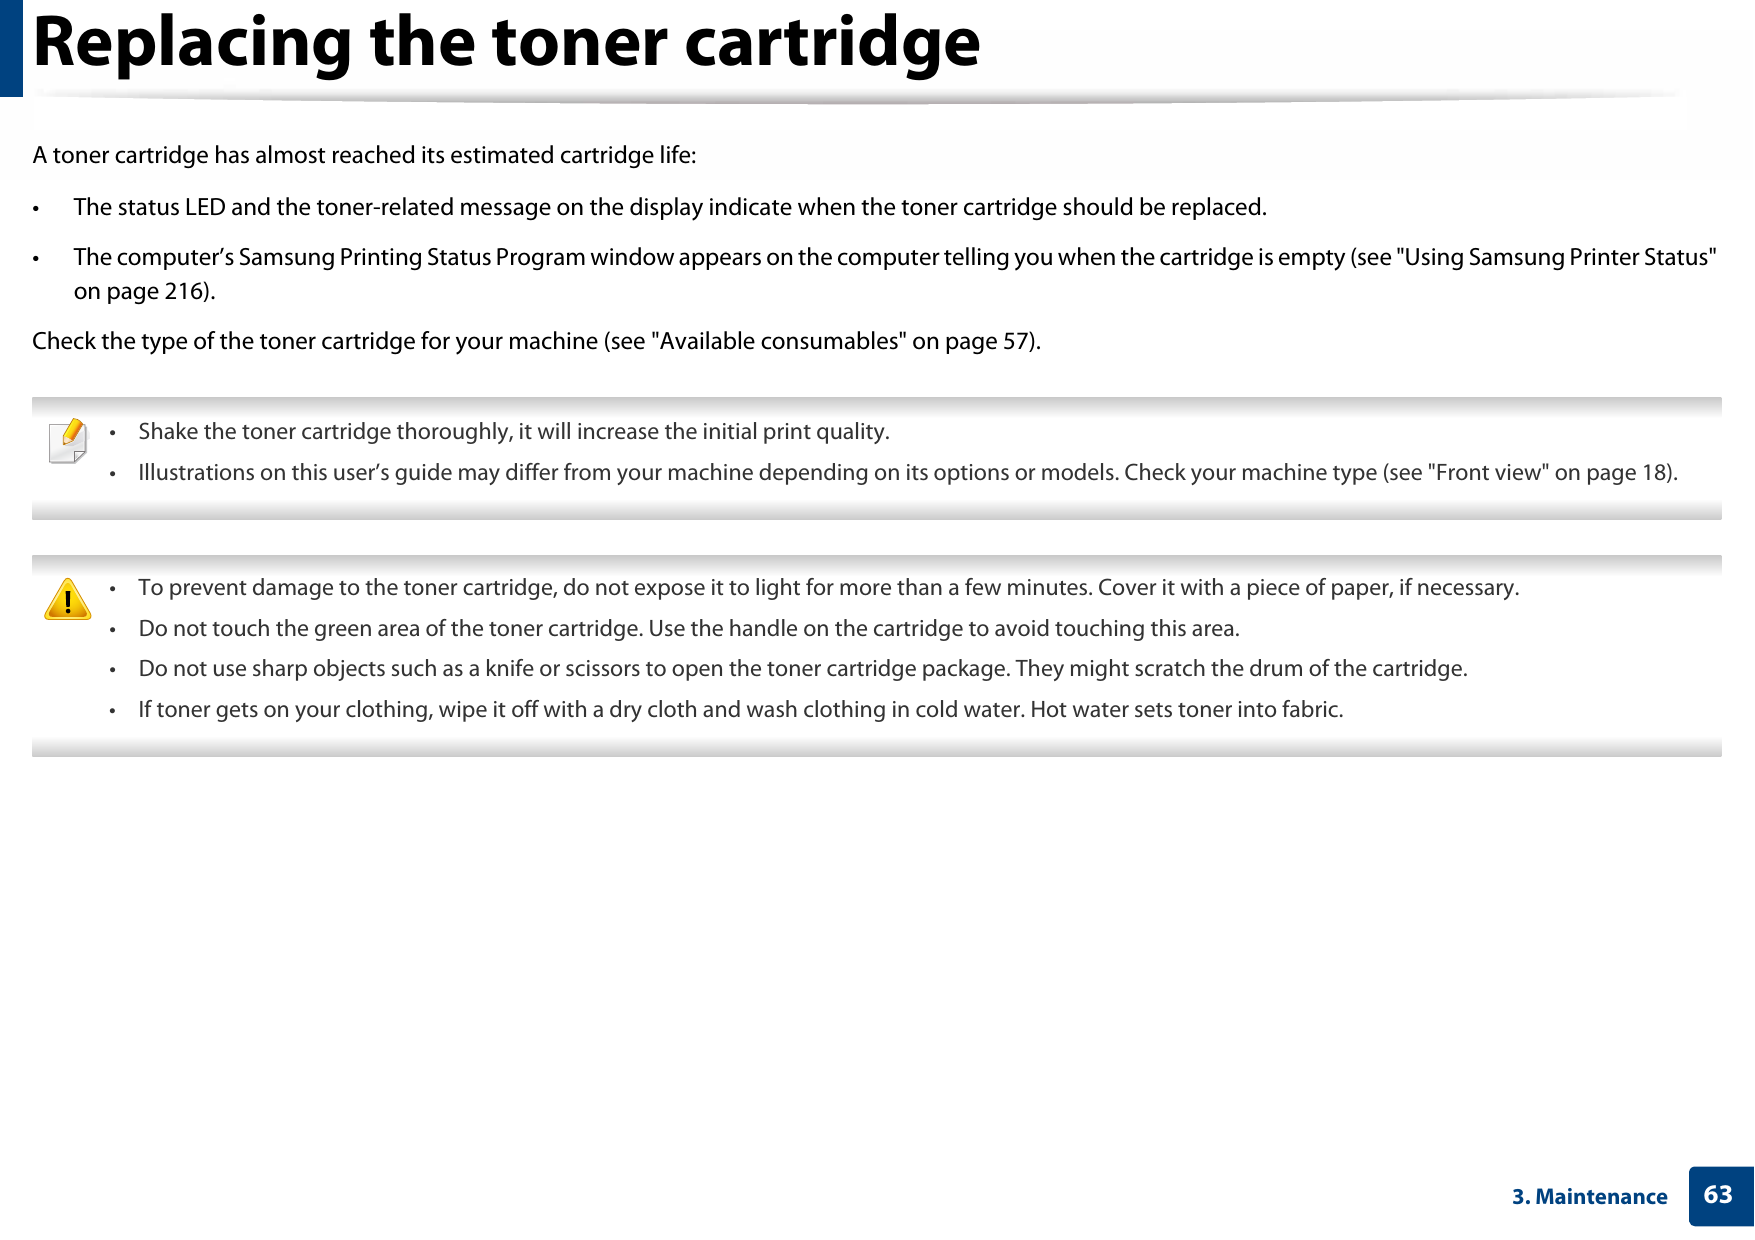 633. MaintenanceReplacing the toner cartridgeA toner cartridge has almost reached its estimated cartridge life:• The status LED and the toner-related message on the display indicate when the toner cartridge should be replaced.• The computer’s Samsung Printing Status Program window appears on the computer telling you when the cartridge is empty (see &quot;Using Samsung Printer Status&quot; on page 216).Check the type of the toner cartridge for your machine (see &quot;Available consumables&quot; on page 57). • Shake the toner cartridge thoroughly, it will increase the initial print quality.• Illustrations on this user’s guide may differ from your machine depending on its options or models. Check your machine type (see &quot;Front view&quot; on page 18).  • To prevent damage to the toner cartridge, do not expose it to light for more than a few minutes. Cover it with a piece of paper, if necessary.• Do not touch the green area of the toner cartridge. Use the handle on the cartridge to avoid touching this area.• Do not use sharp objects such as a knife or scissors to open the toner cartridge package. They might scratch the drum of the cartridge.• If toner gets on your clothing, wipe it off with a dry cloth and wash clothing in cold water. Hot water sets toner into fabric. 